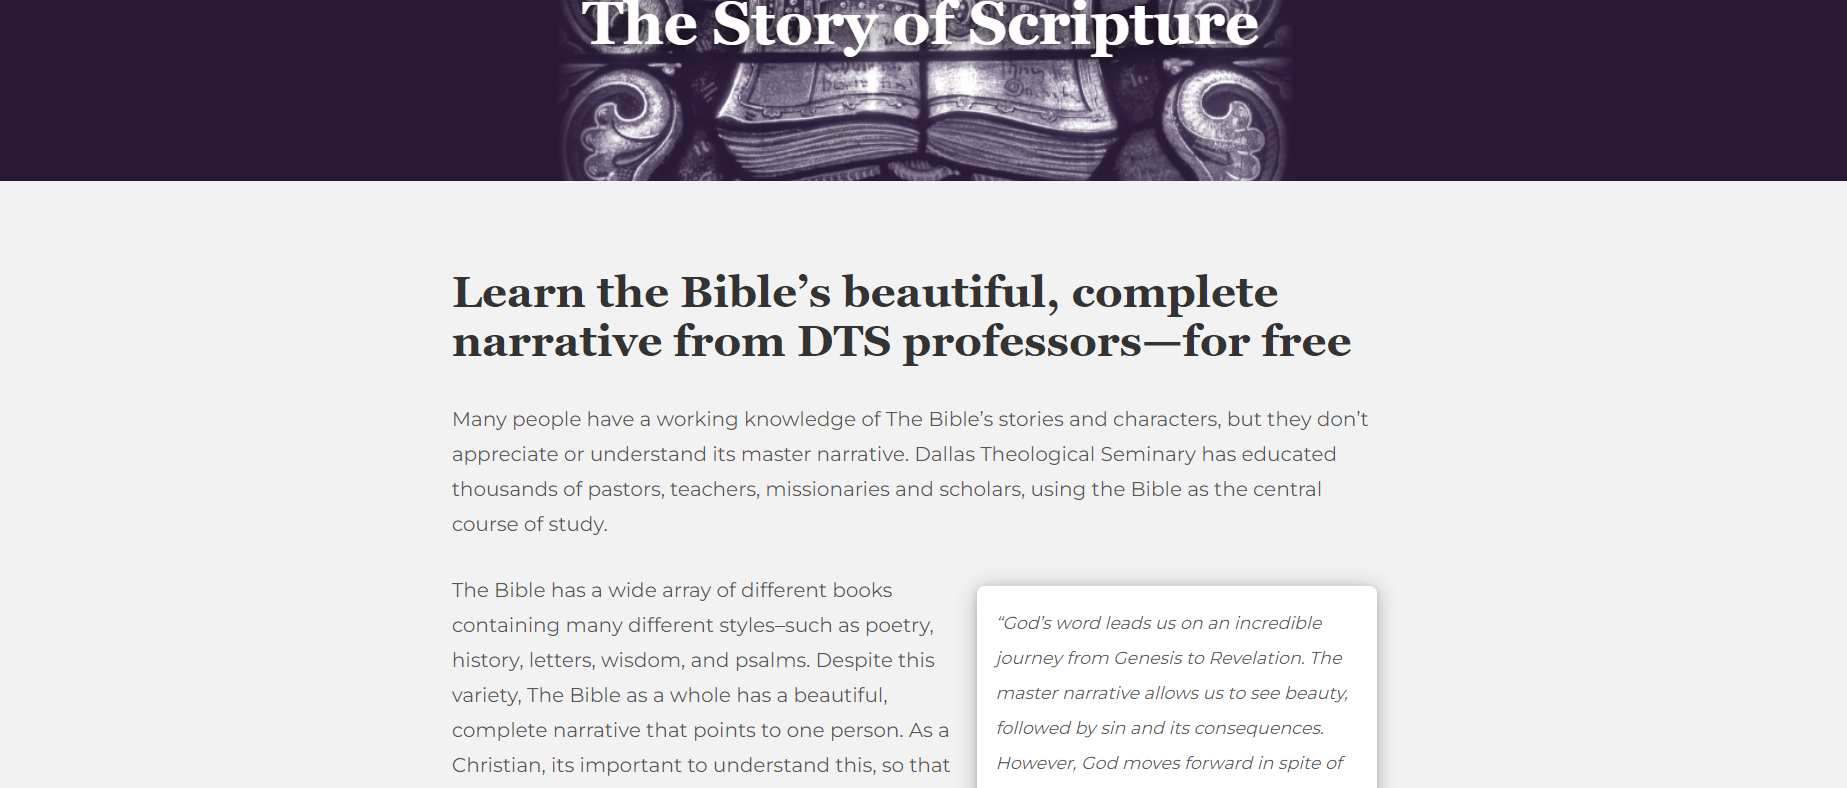 The History of Scripture